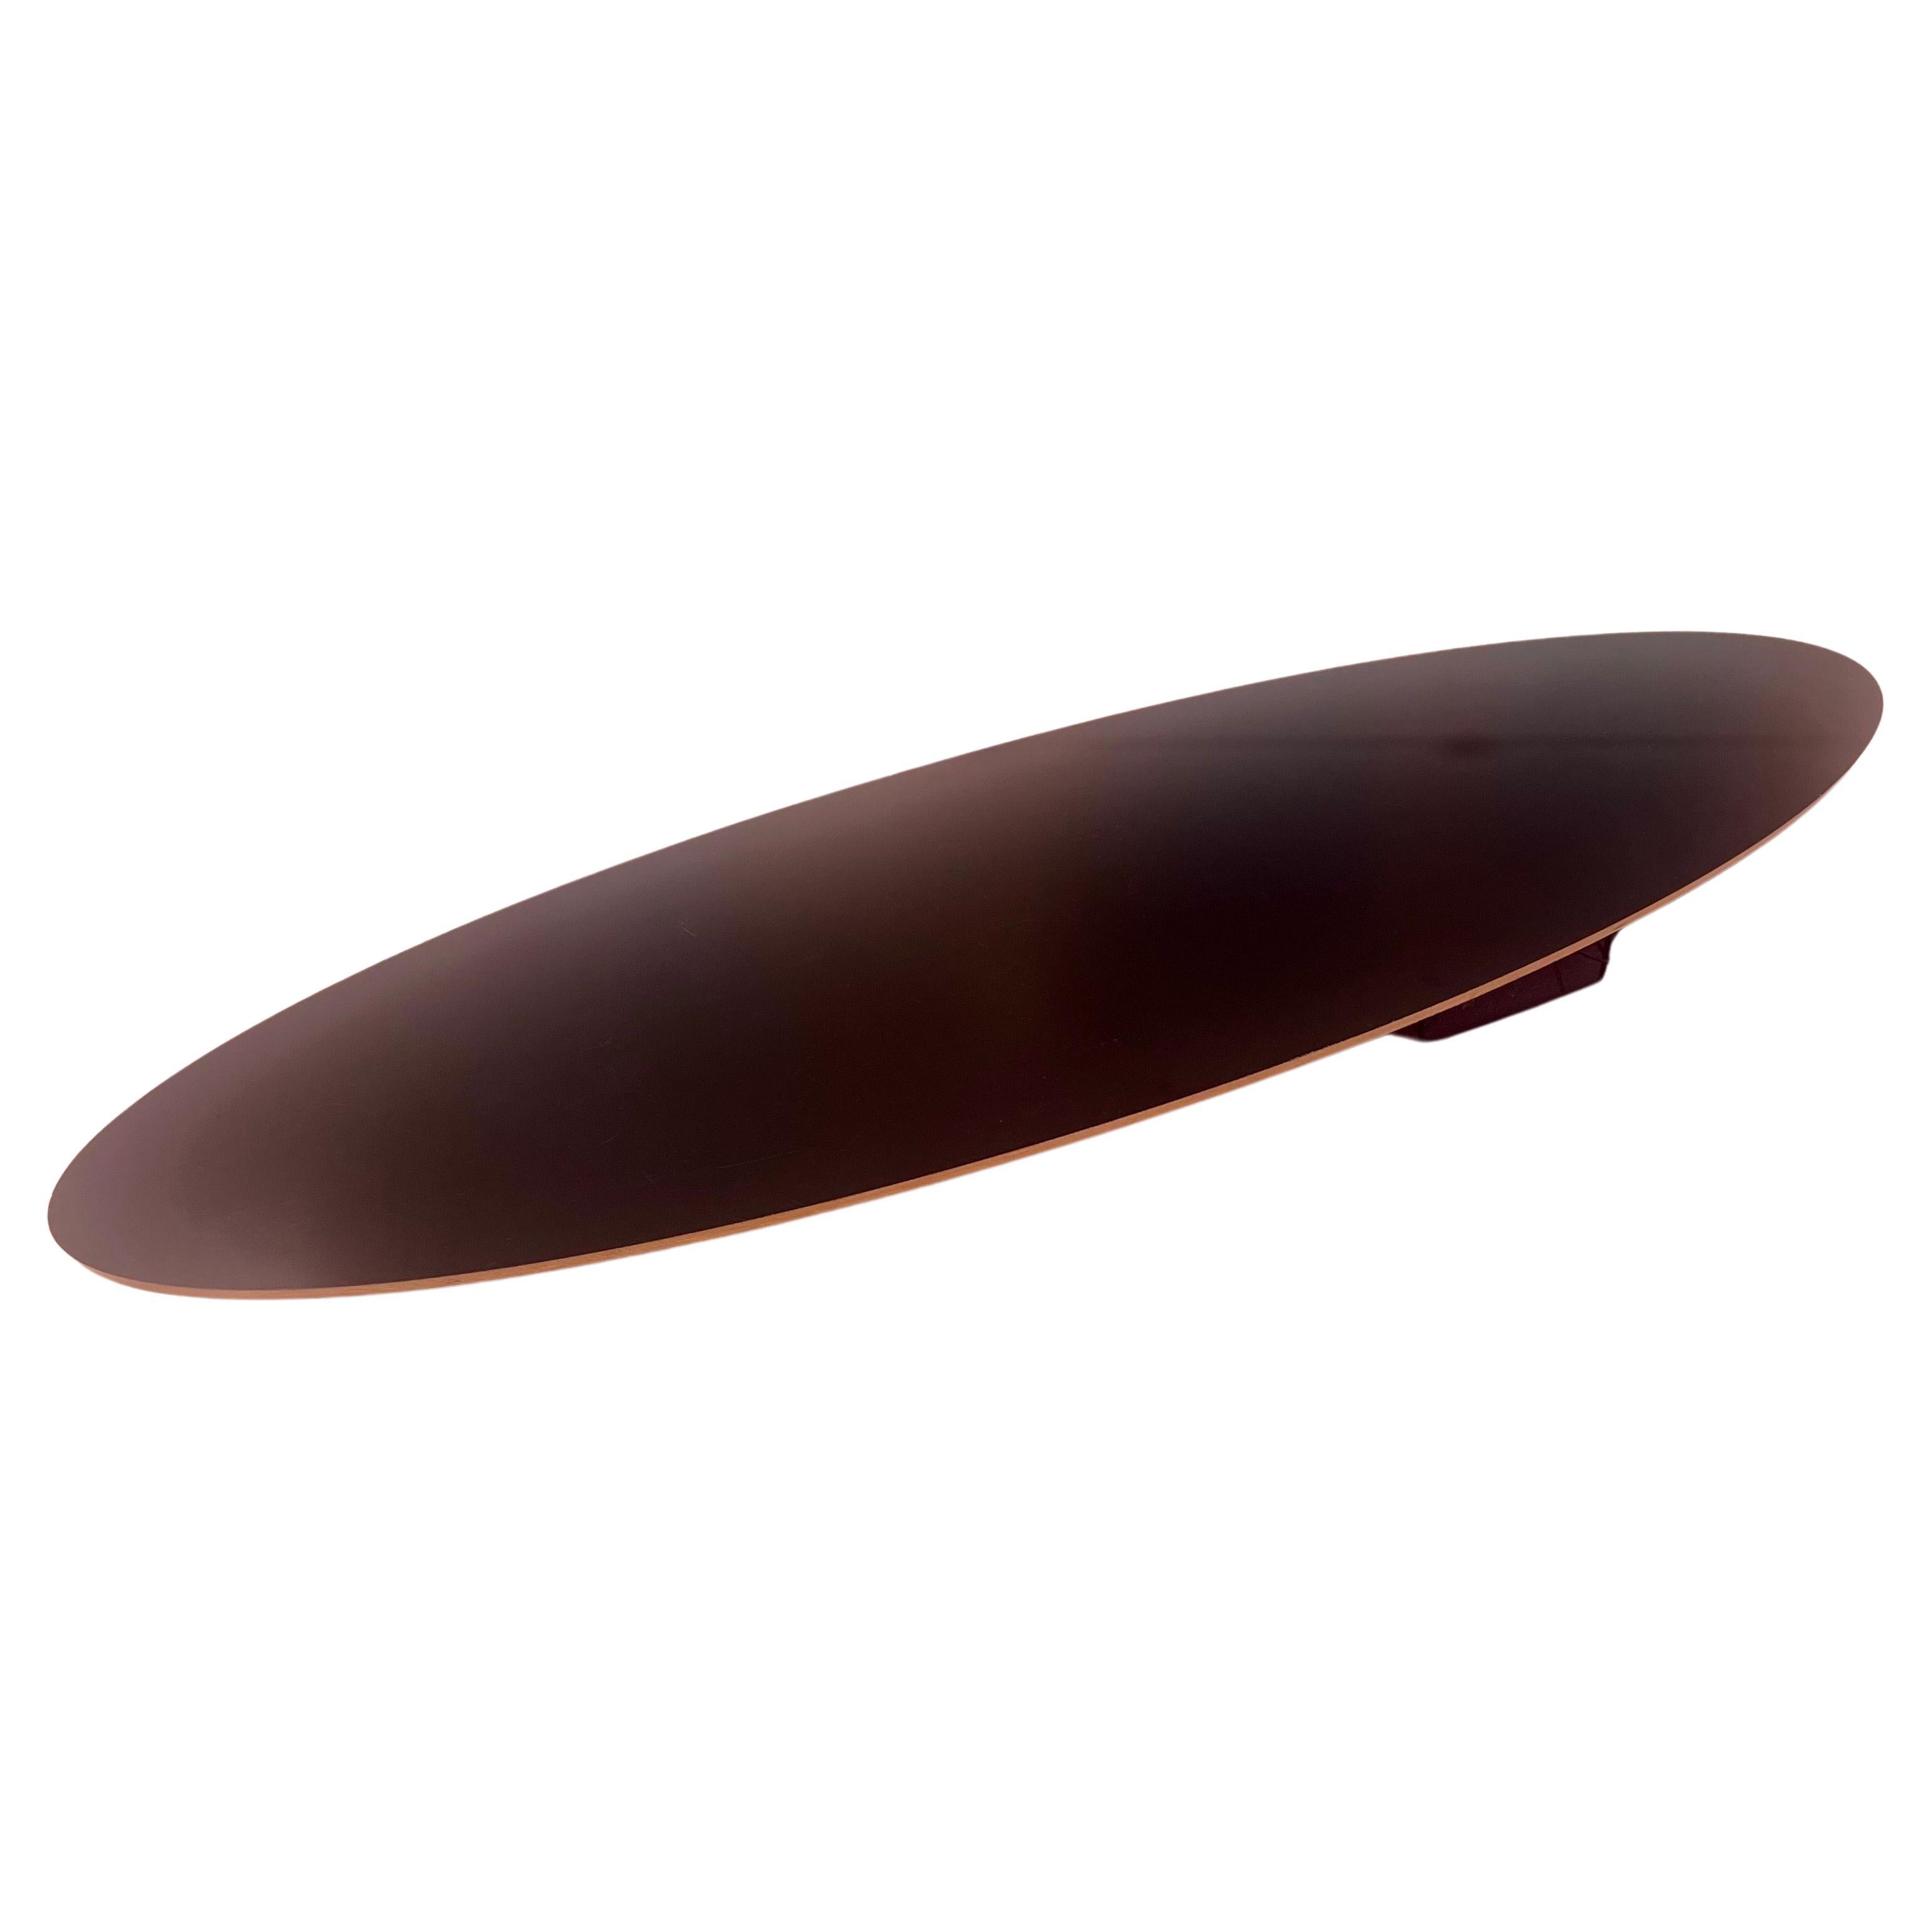 1990;s Original long surfboard oval coffee table designed by Eames, for Herman Miller nice condition a must have piece for any Mid Century, Danish Modern home decor nice condition a couple of fleabites on the edge as shown.